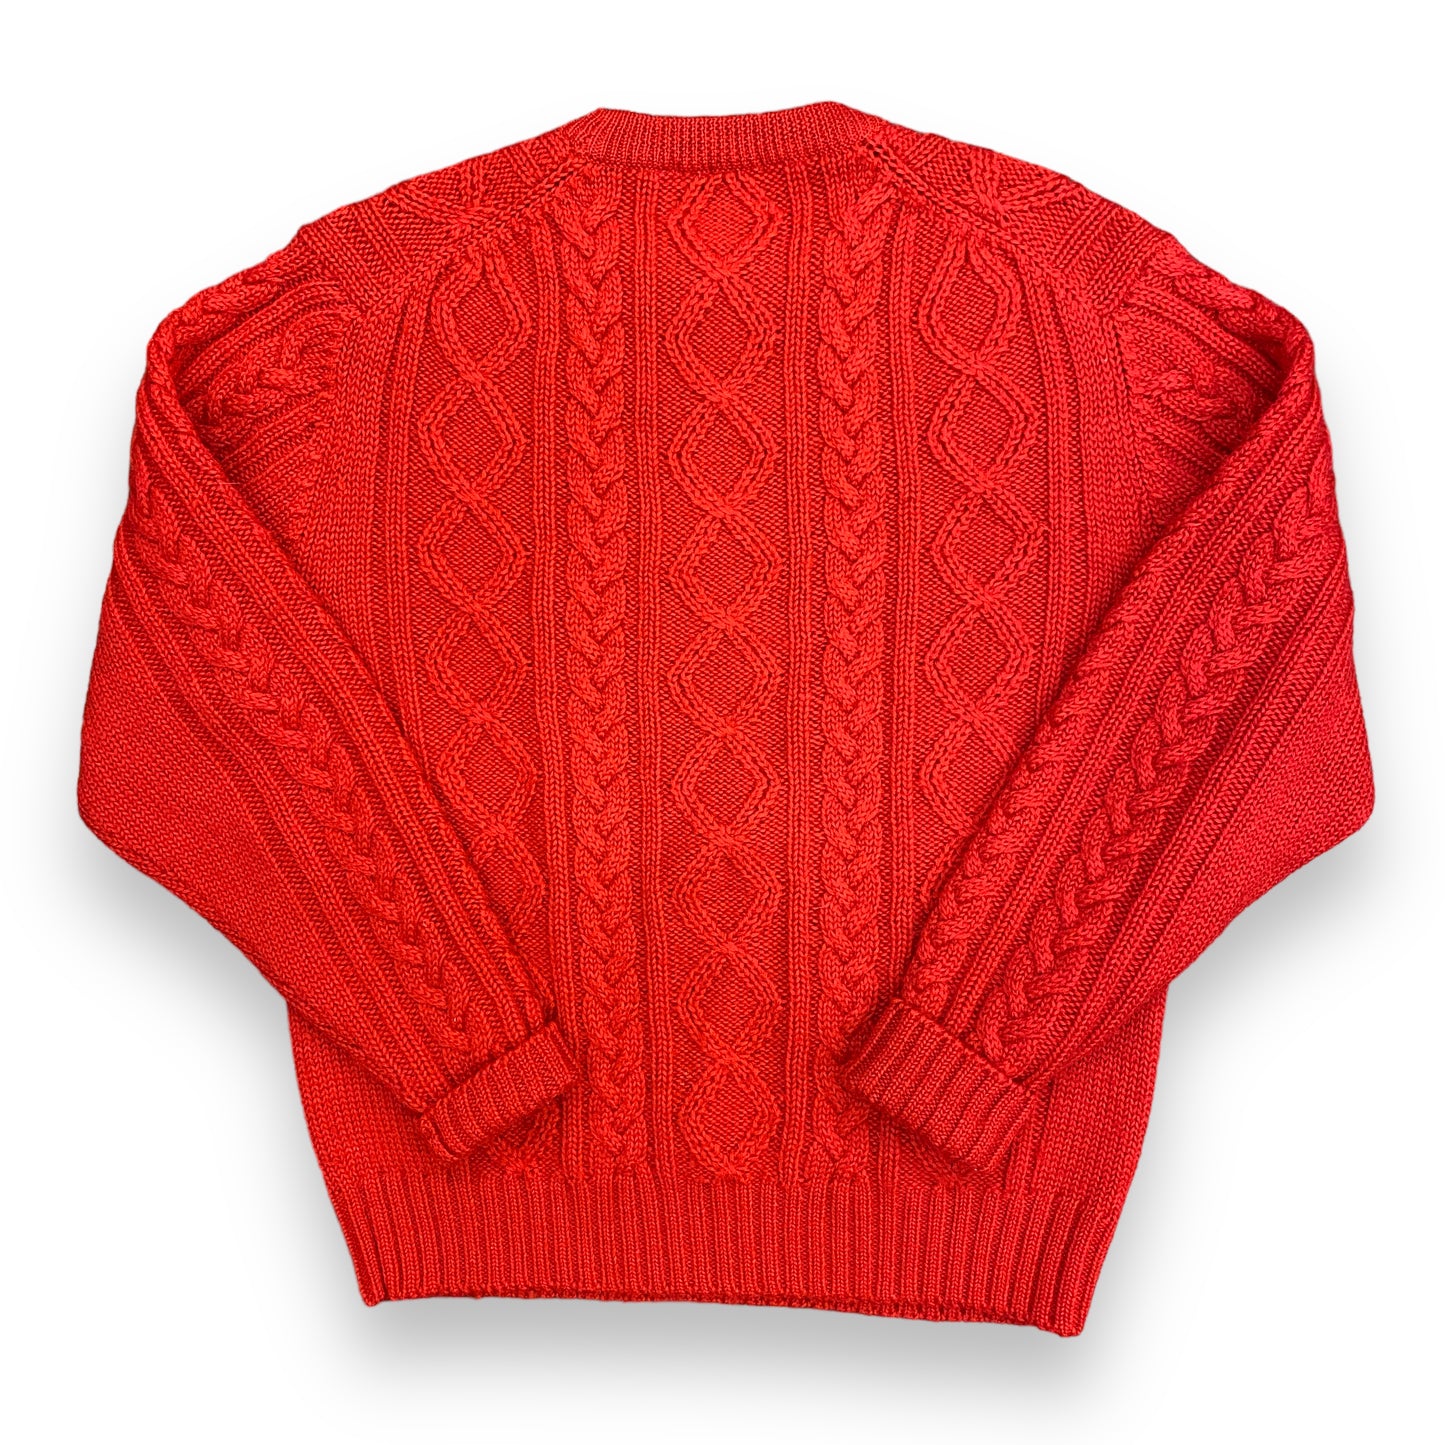 1990s The Fox Bay Company Red Cable Knit Sweater - Size XL